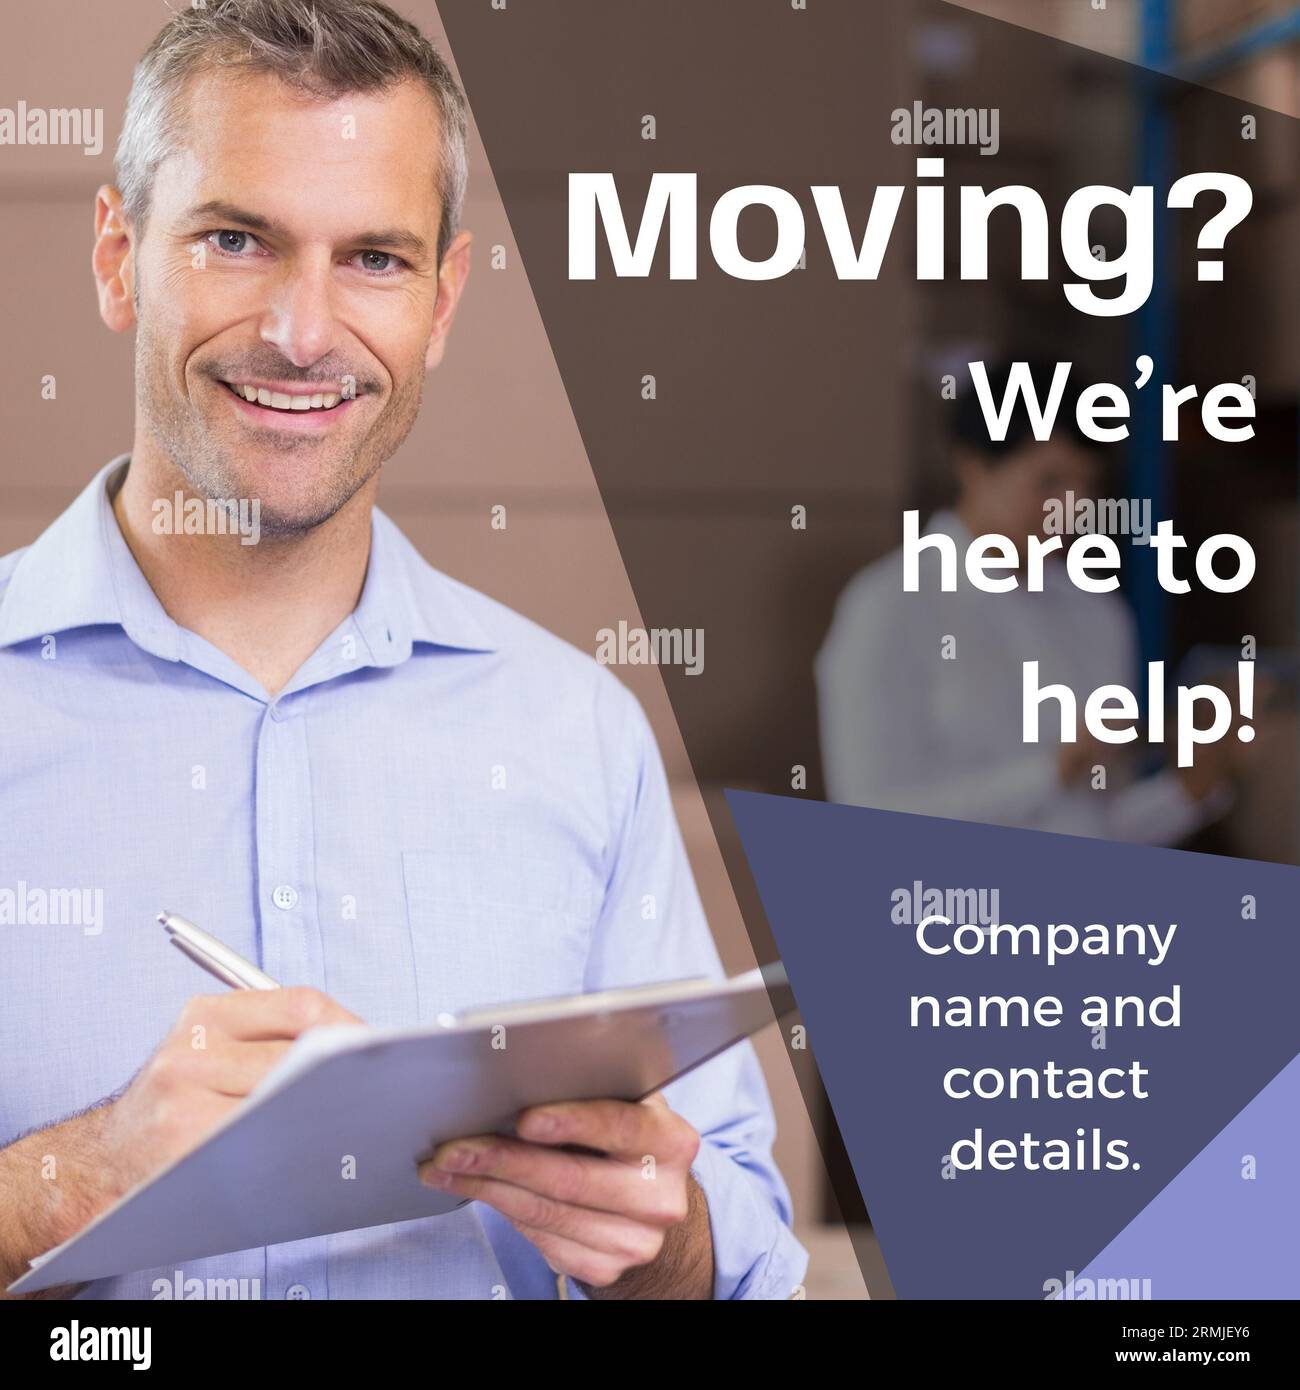 Moving, we're here to help, company name and contact details and portrait of caucasian businessman Stock Photo